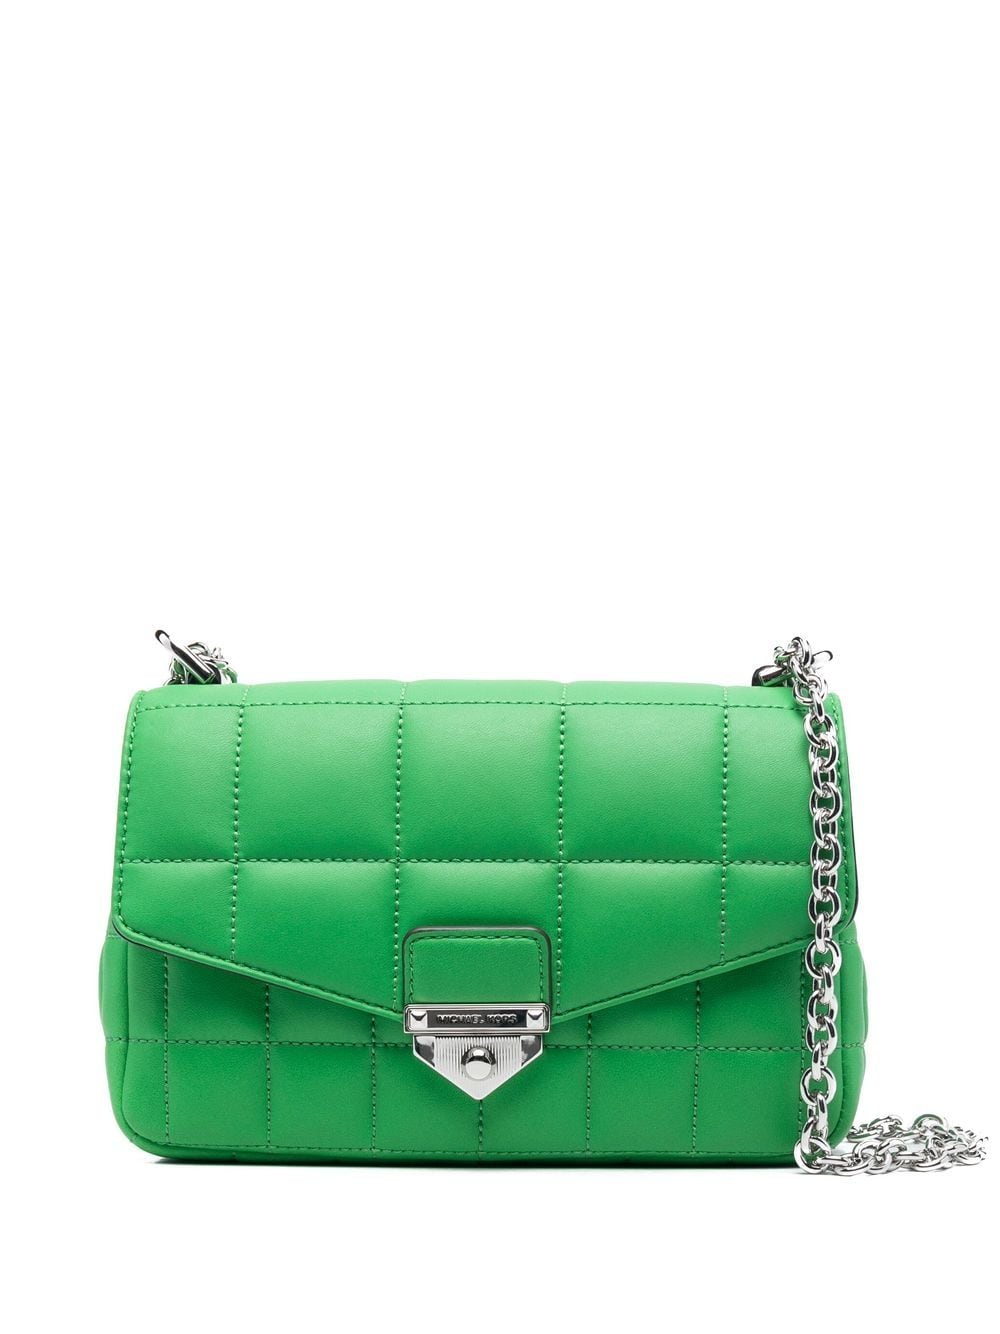 Michael Kors Collection Soho quilted shoulder bag - Green von Michael Kors Collection